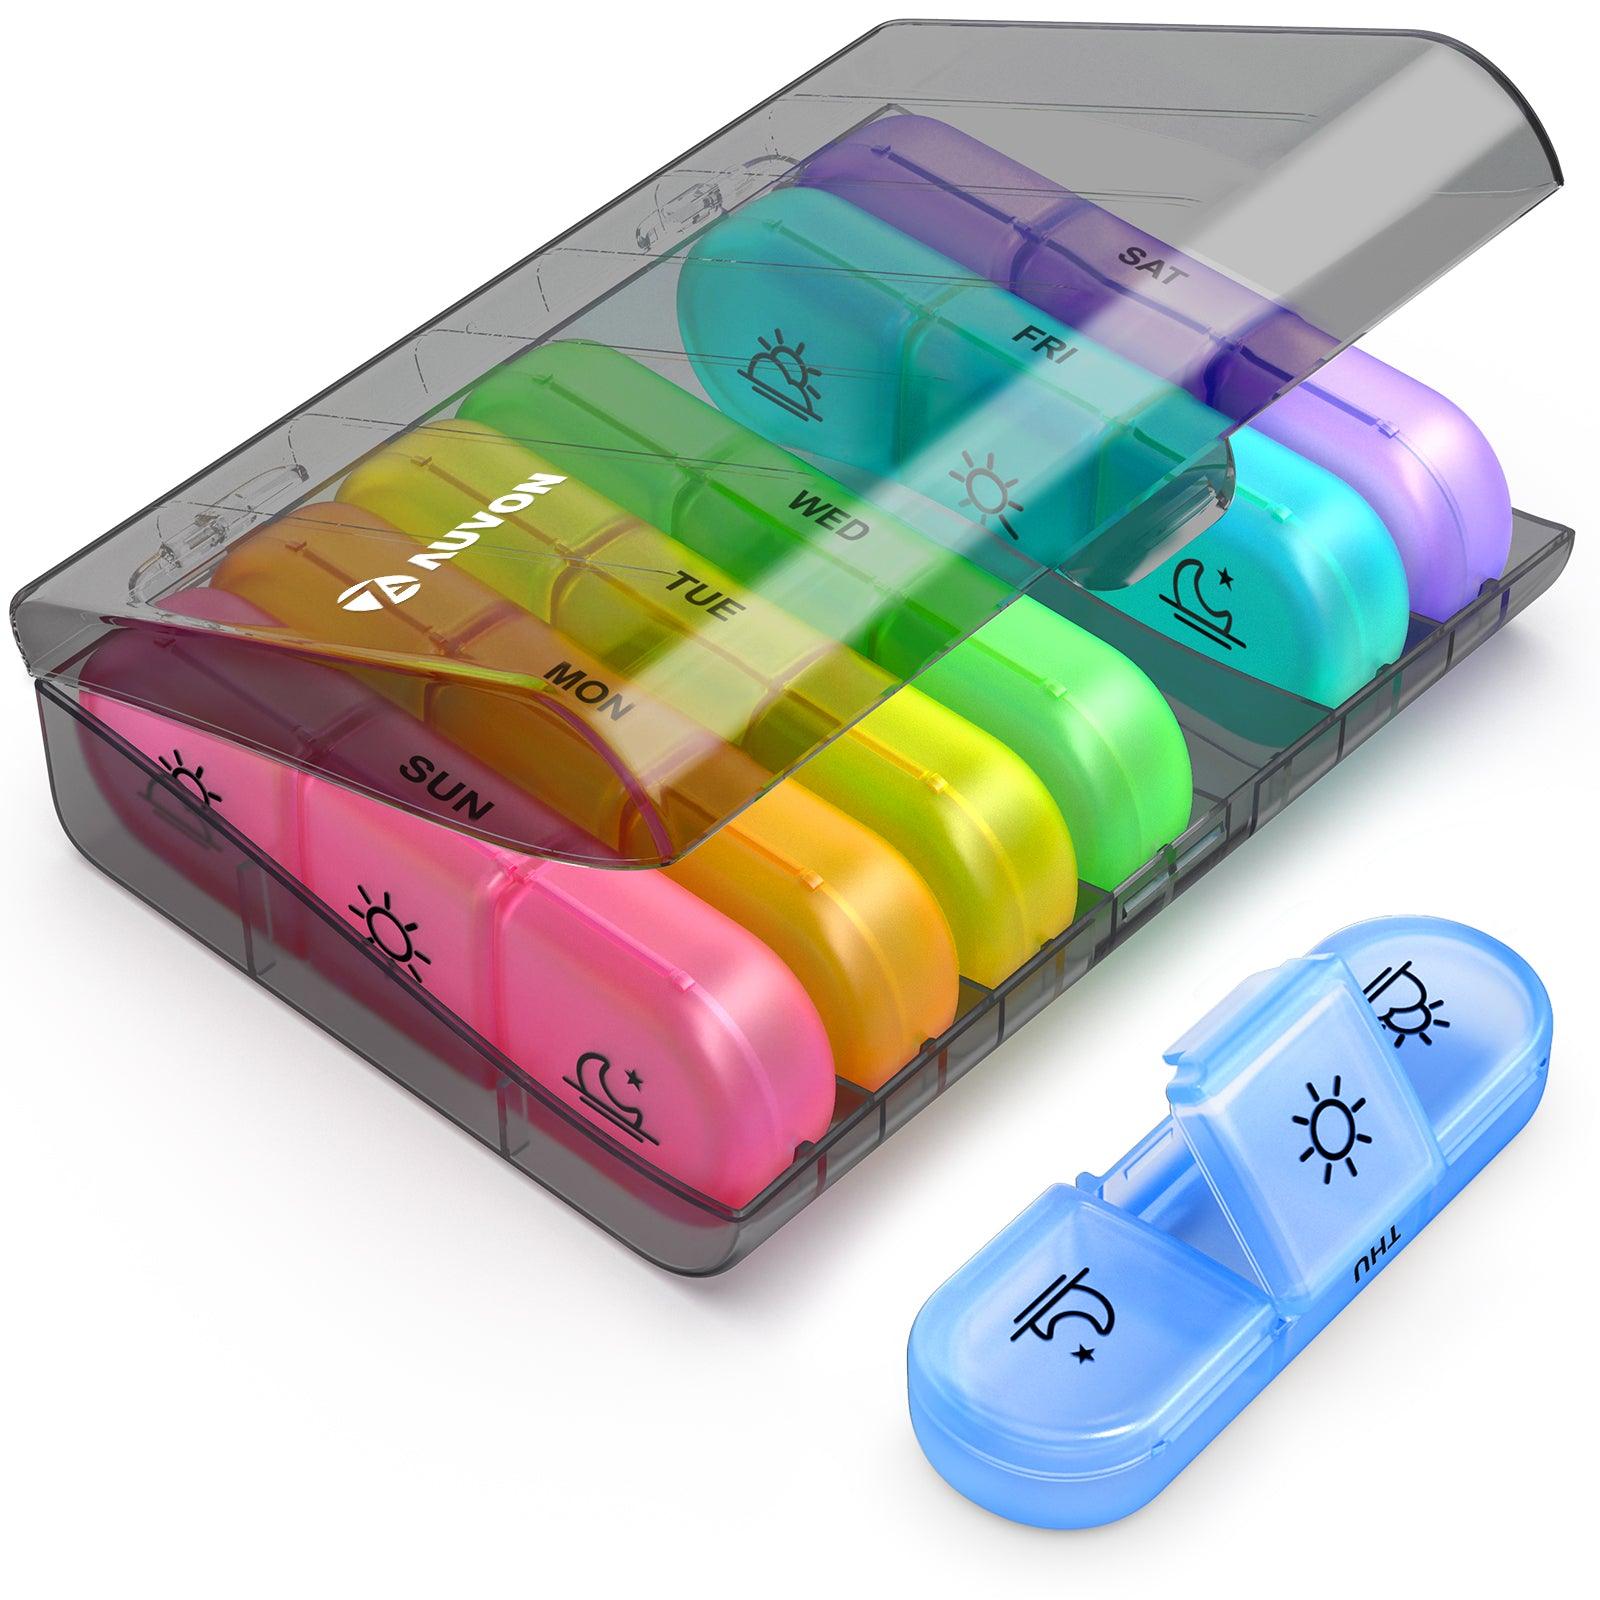 AUVON Weekly Pill Organizer 3-Times-A-Day, Portable 7 Day Pill Box Case with Large Separate Compartments to Hold Medication, Vitamins, Fish Oil and Supplements - AUVON